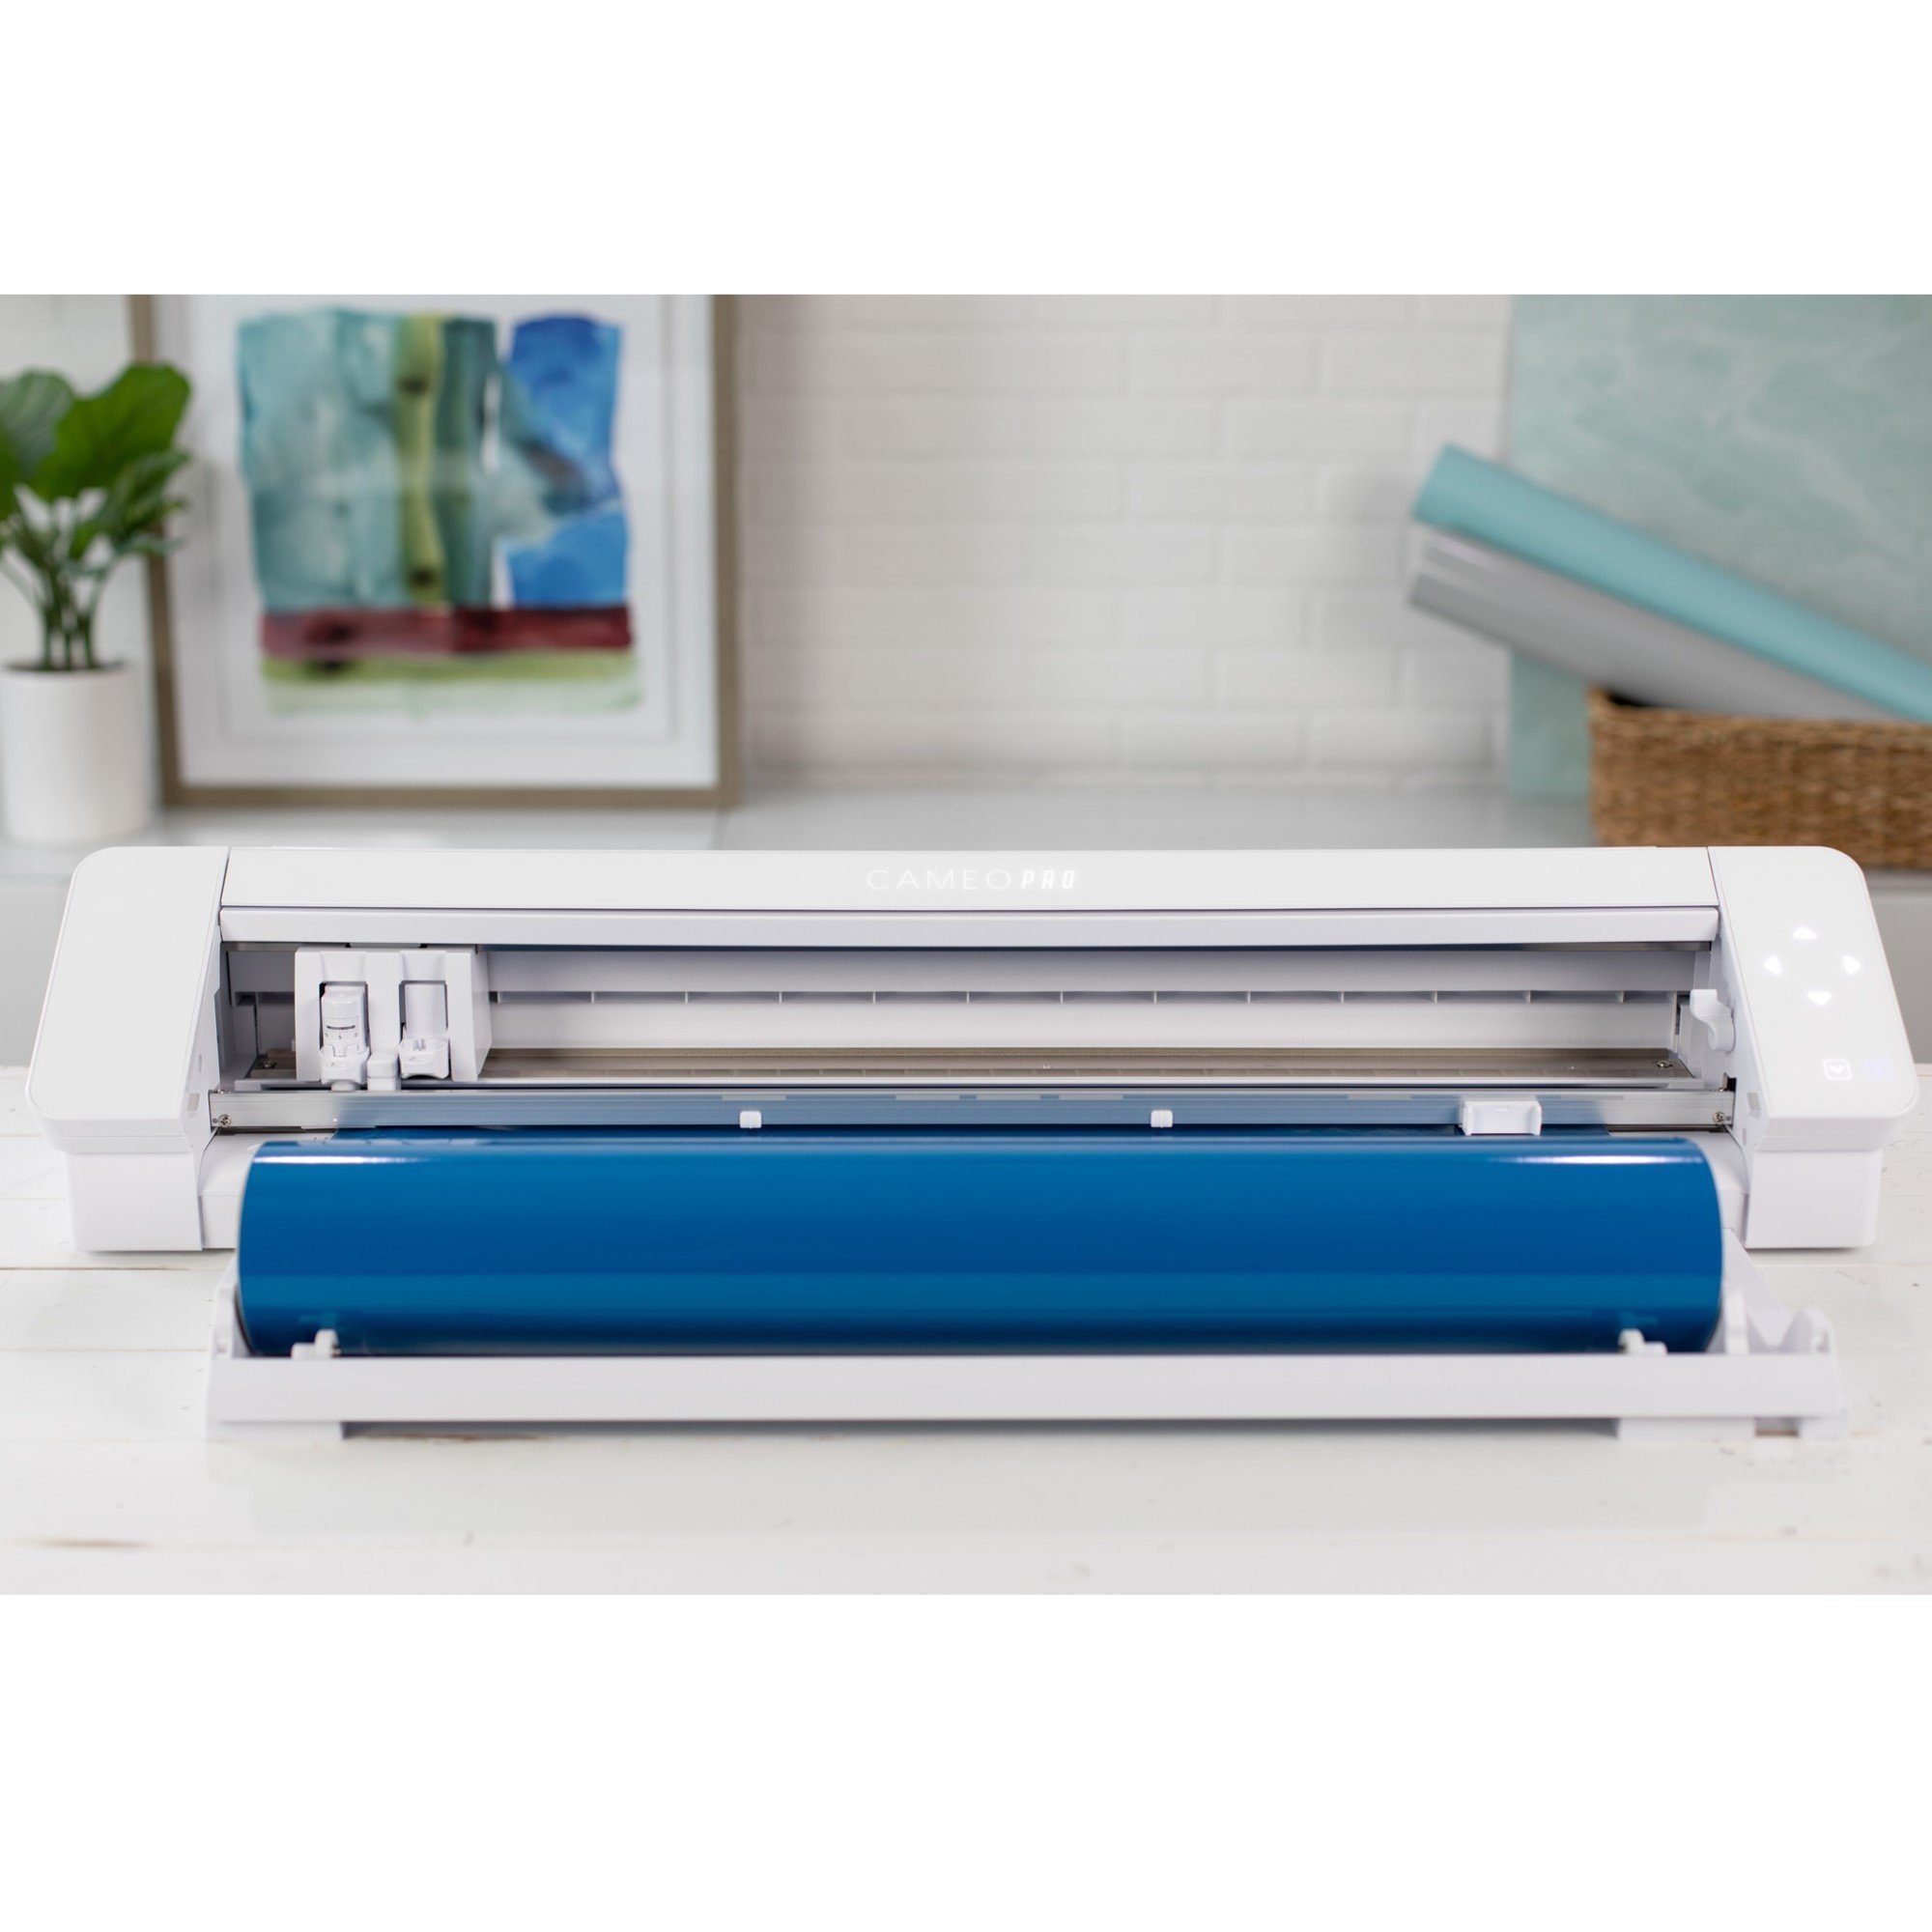 Silhouette Cameo 4 Vinyl Cutters